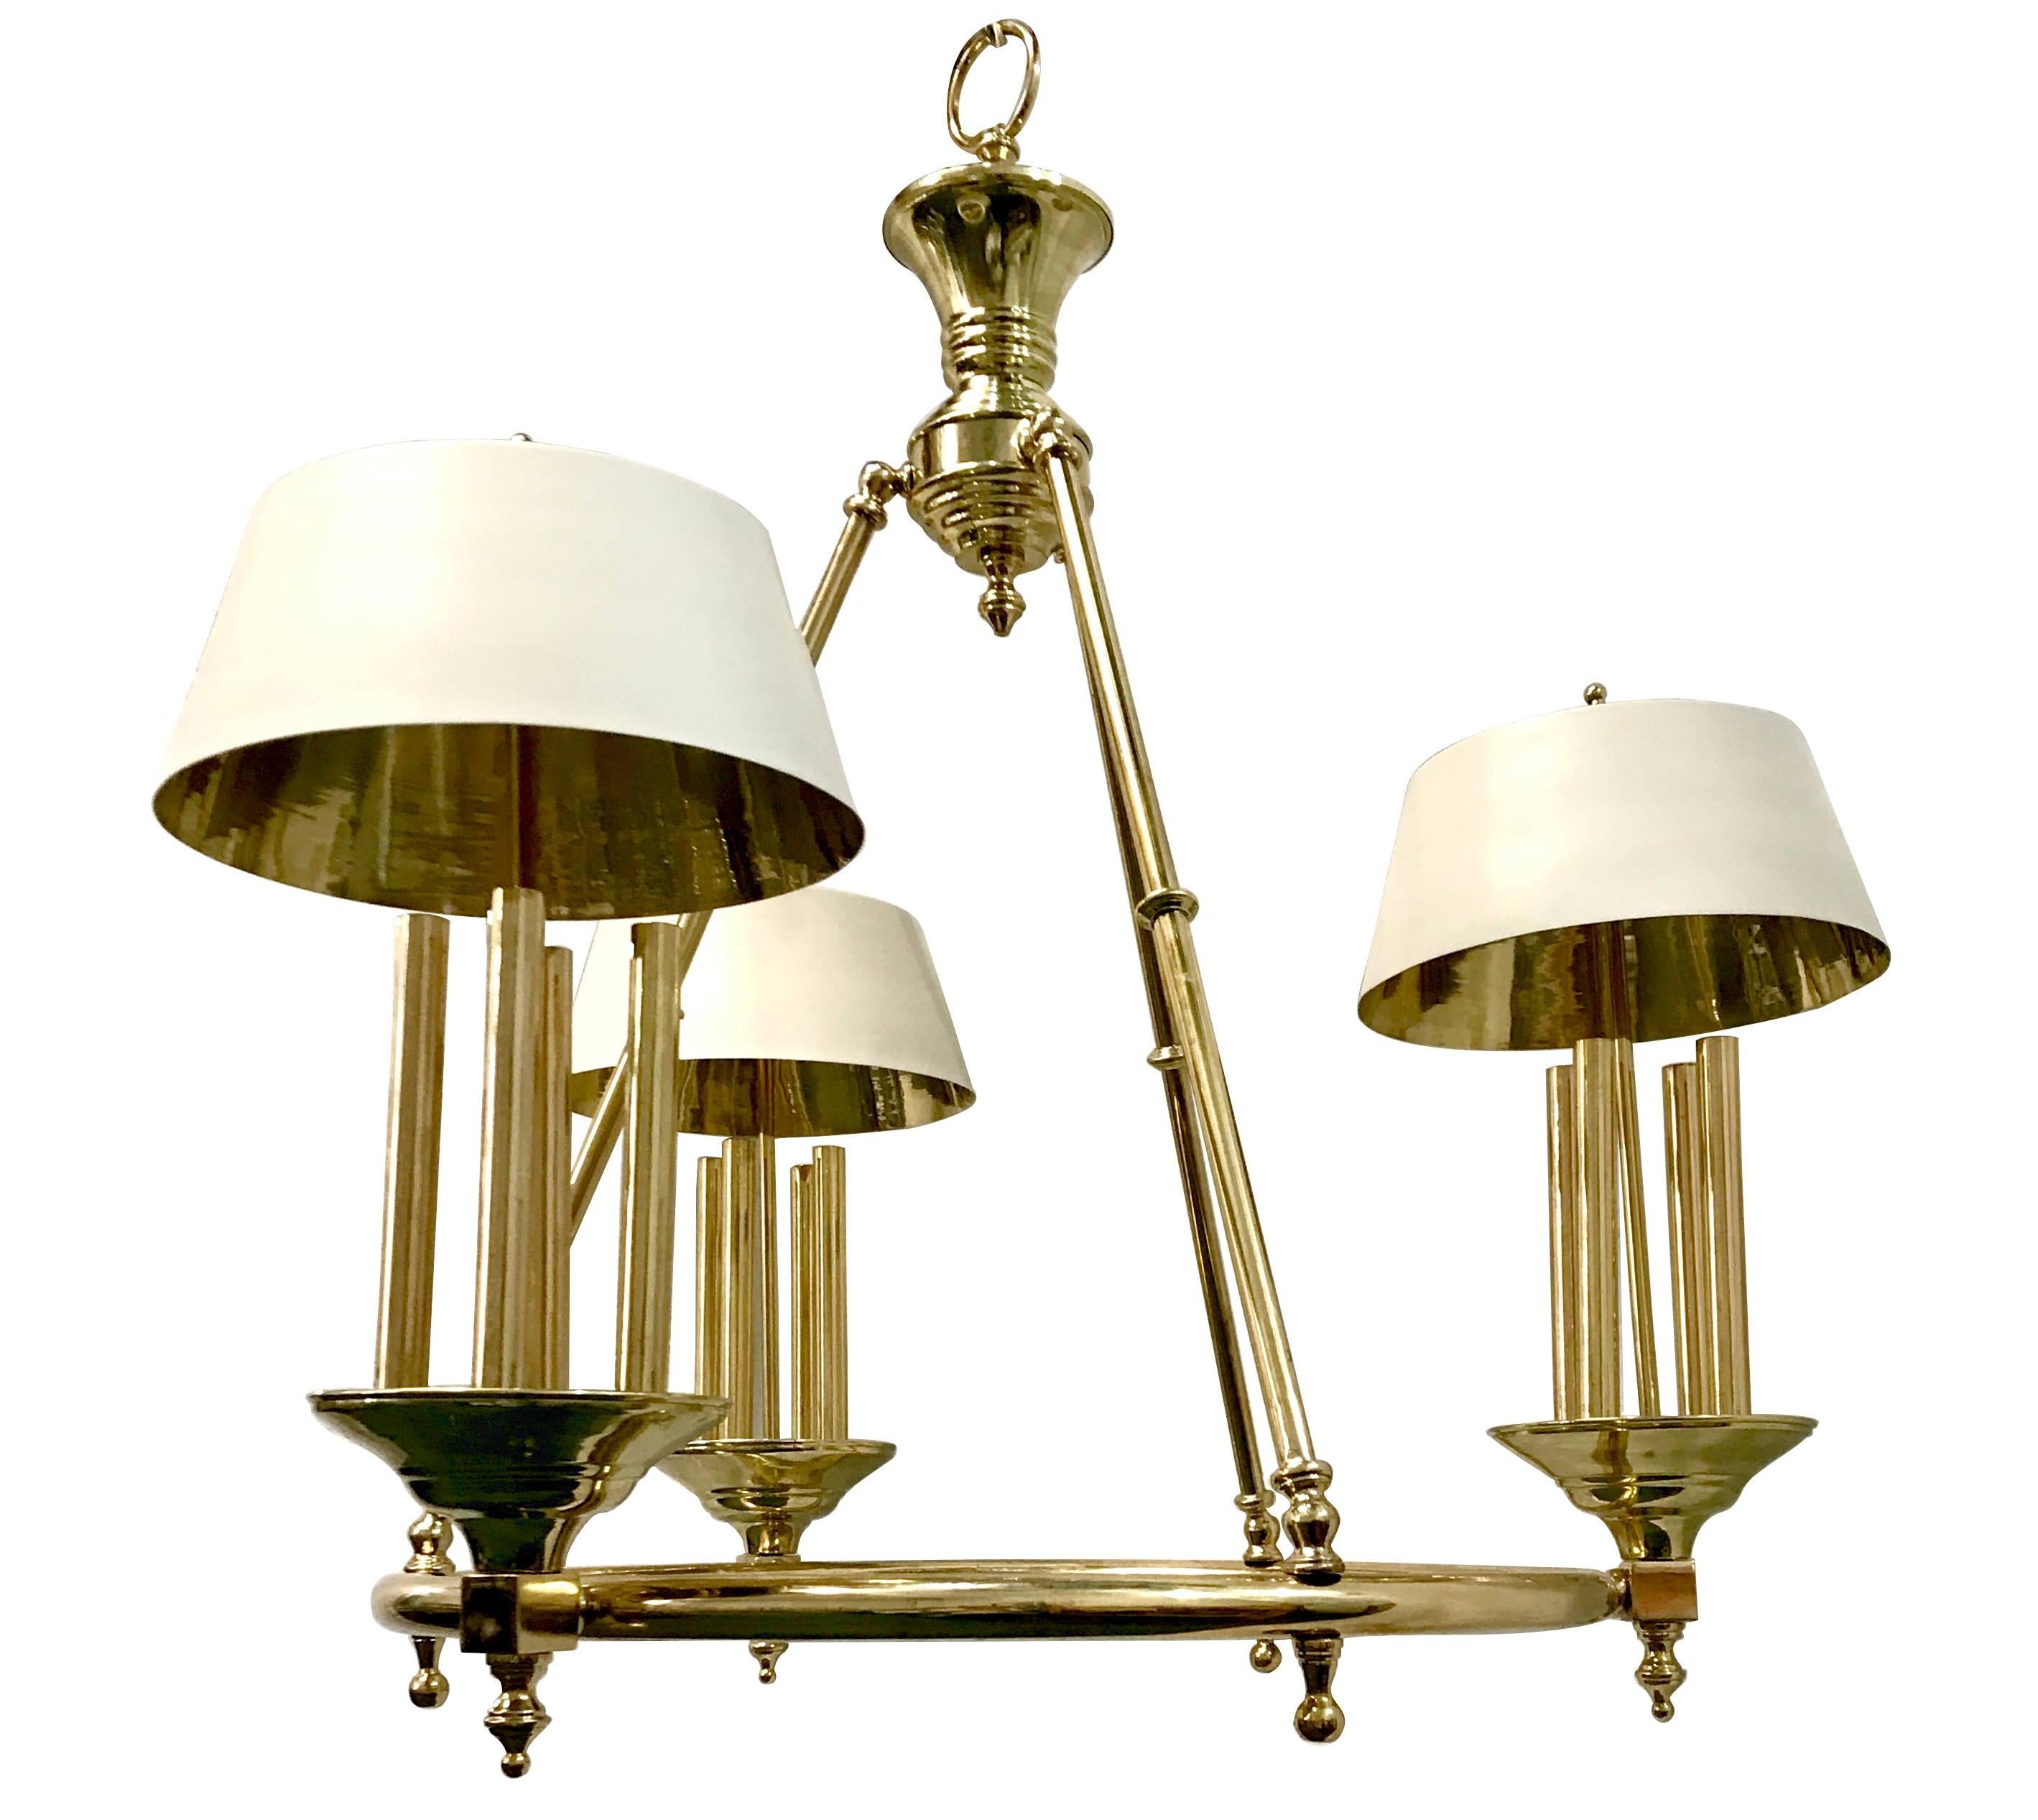 French circa 1950's gilt bronze chandelier with painted tole lamps, 12 lights. Body supported by three rods.

Measurements:
44